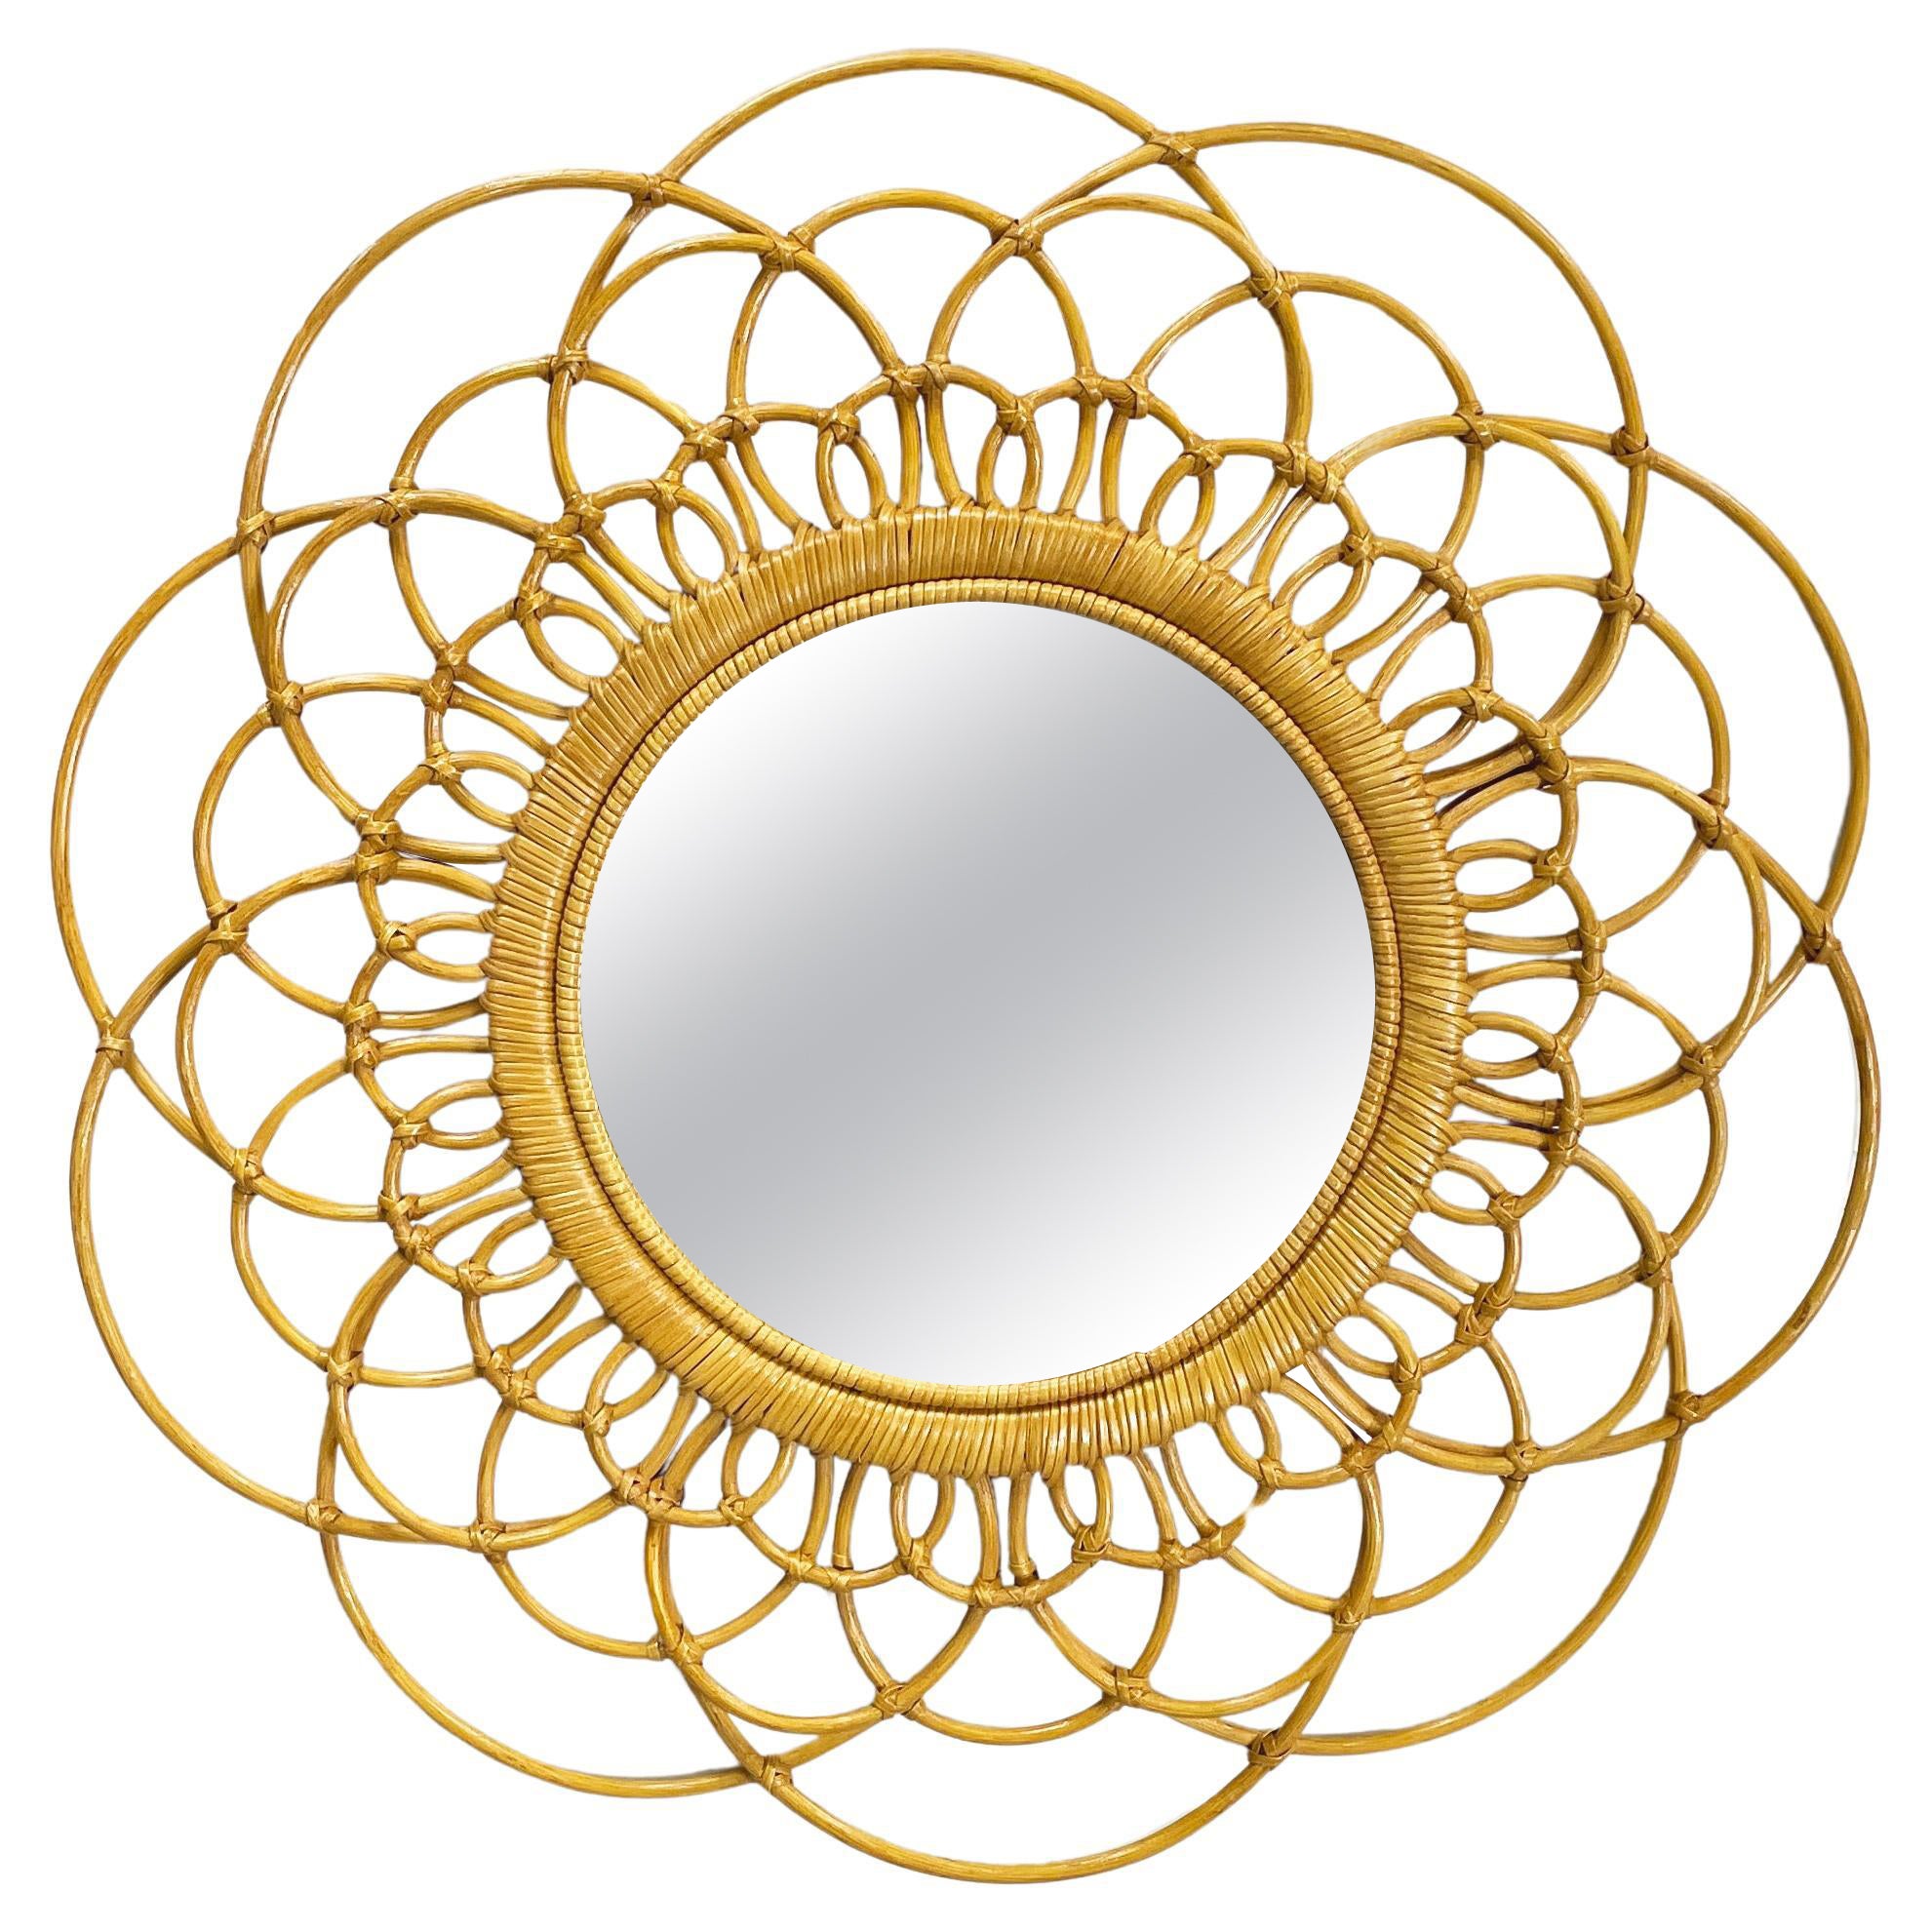 Italian mid-century modern Round rattan wall mirror with curved bamboo, 1960s